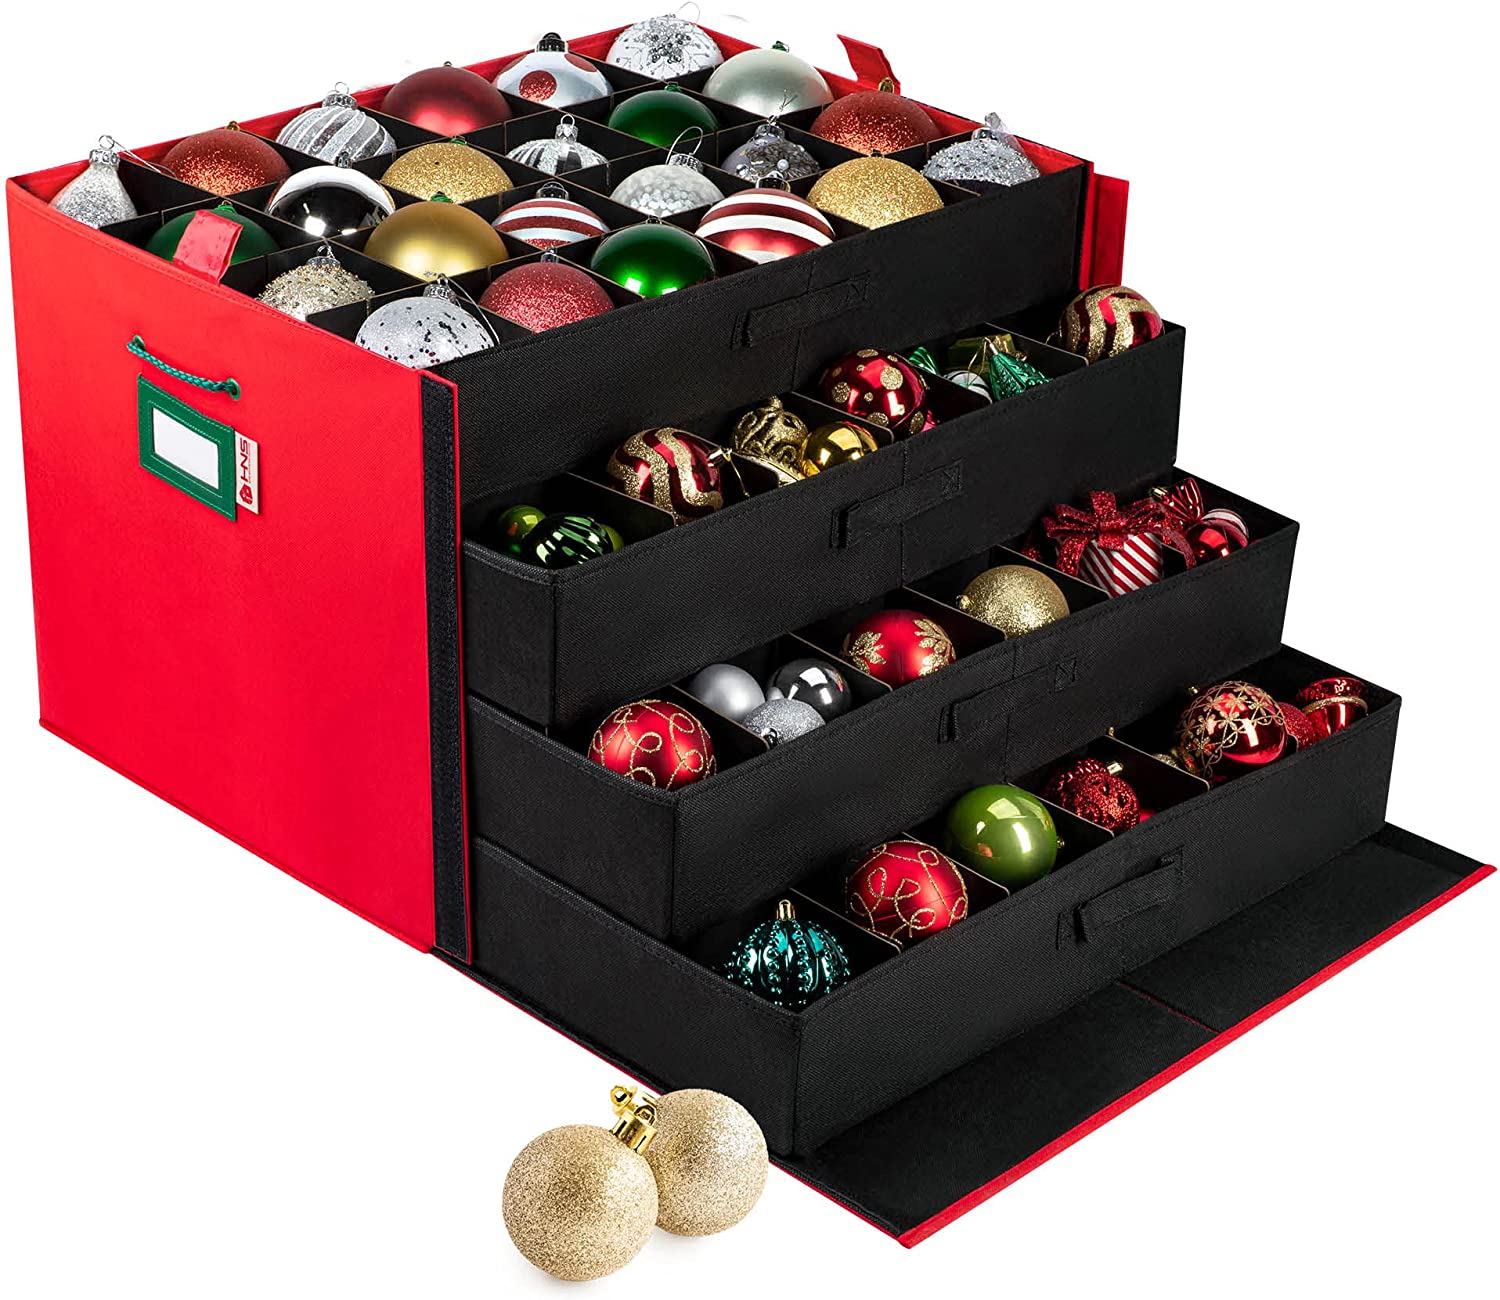 HOLDN Storage Christmas Ornament Storage Container Box with Dividers - Stores Up to 96 - 3 inch Ornaments - Large Christmas Ball Storage Container